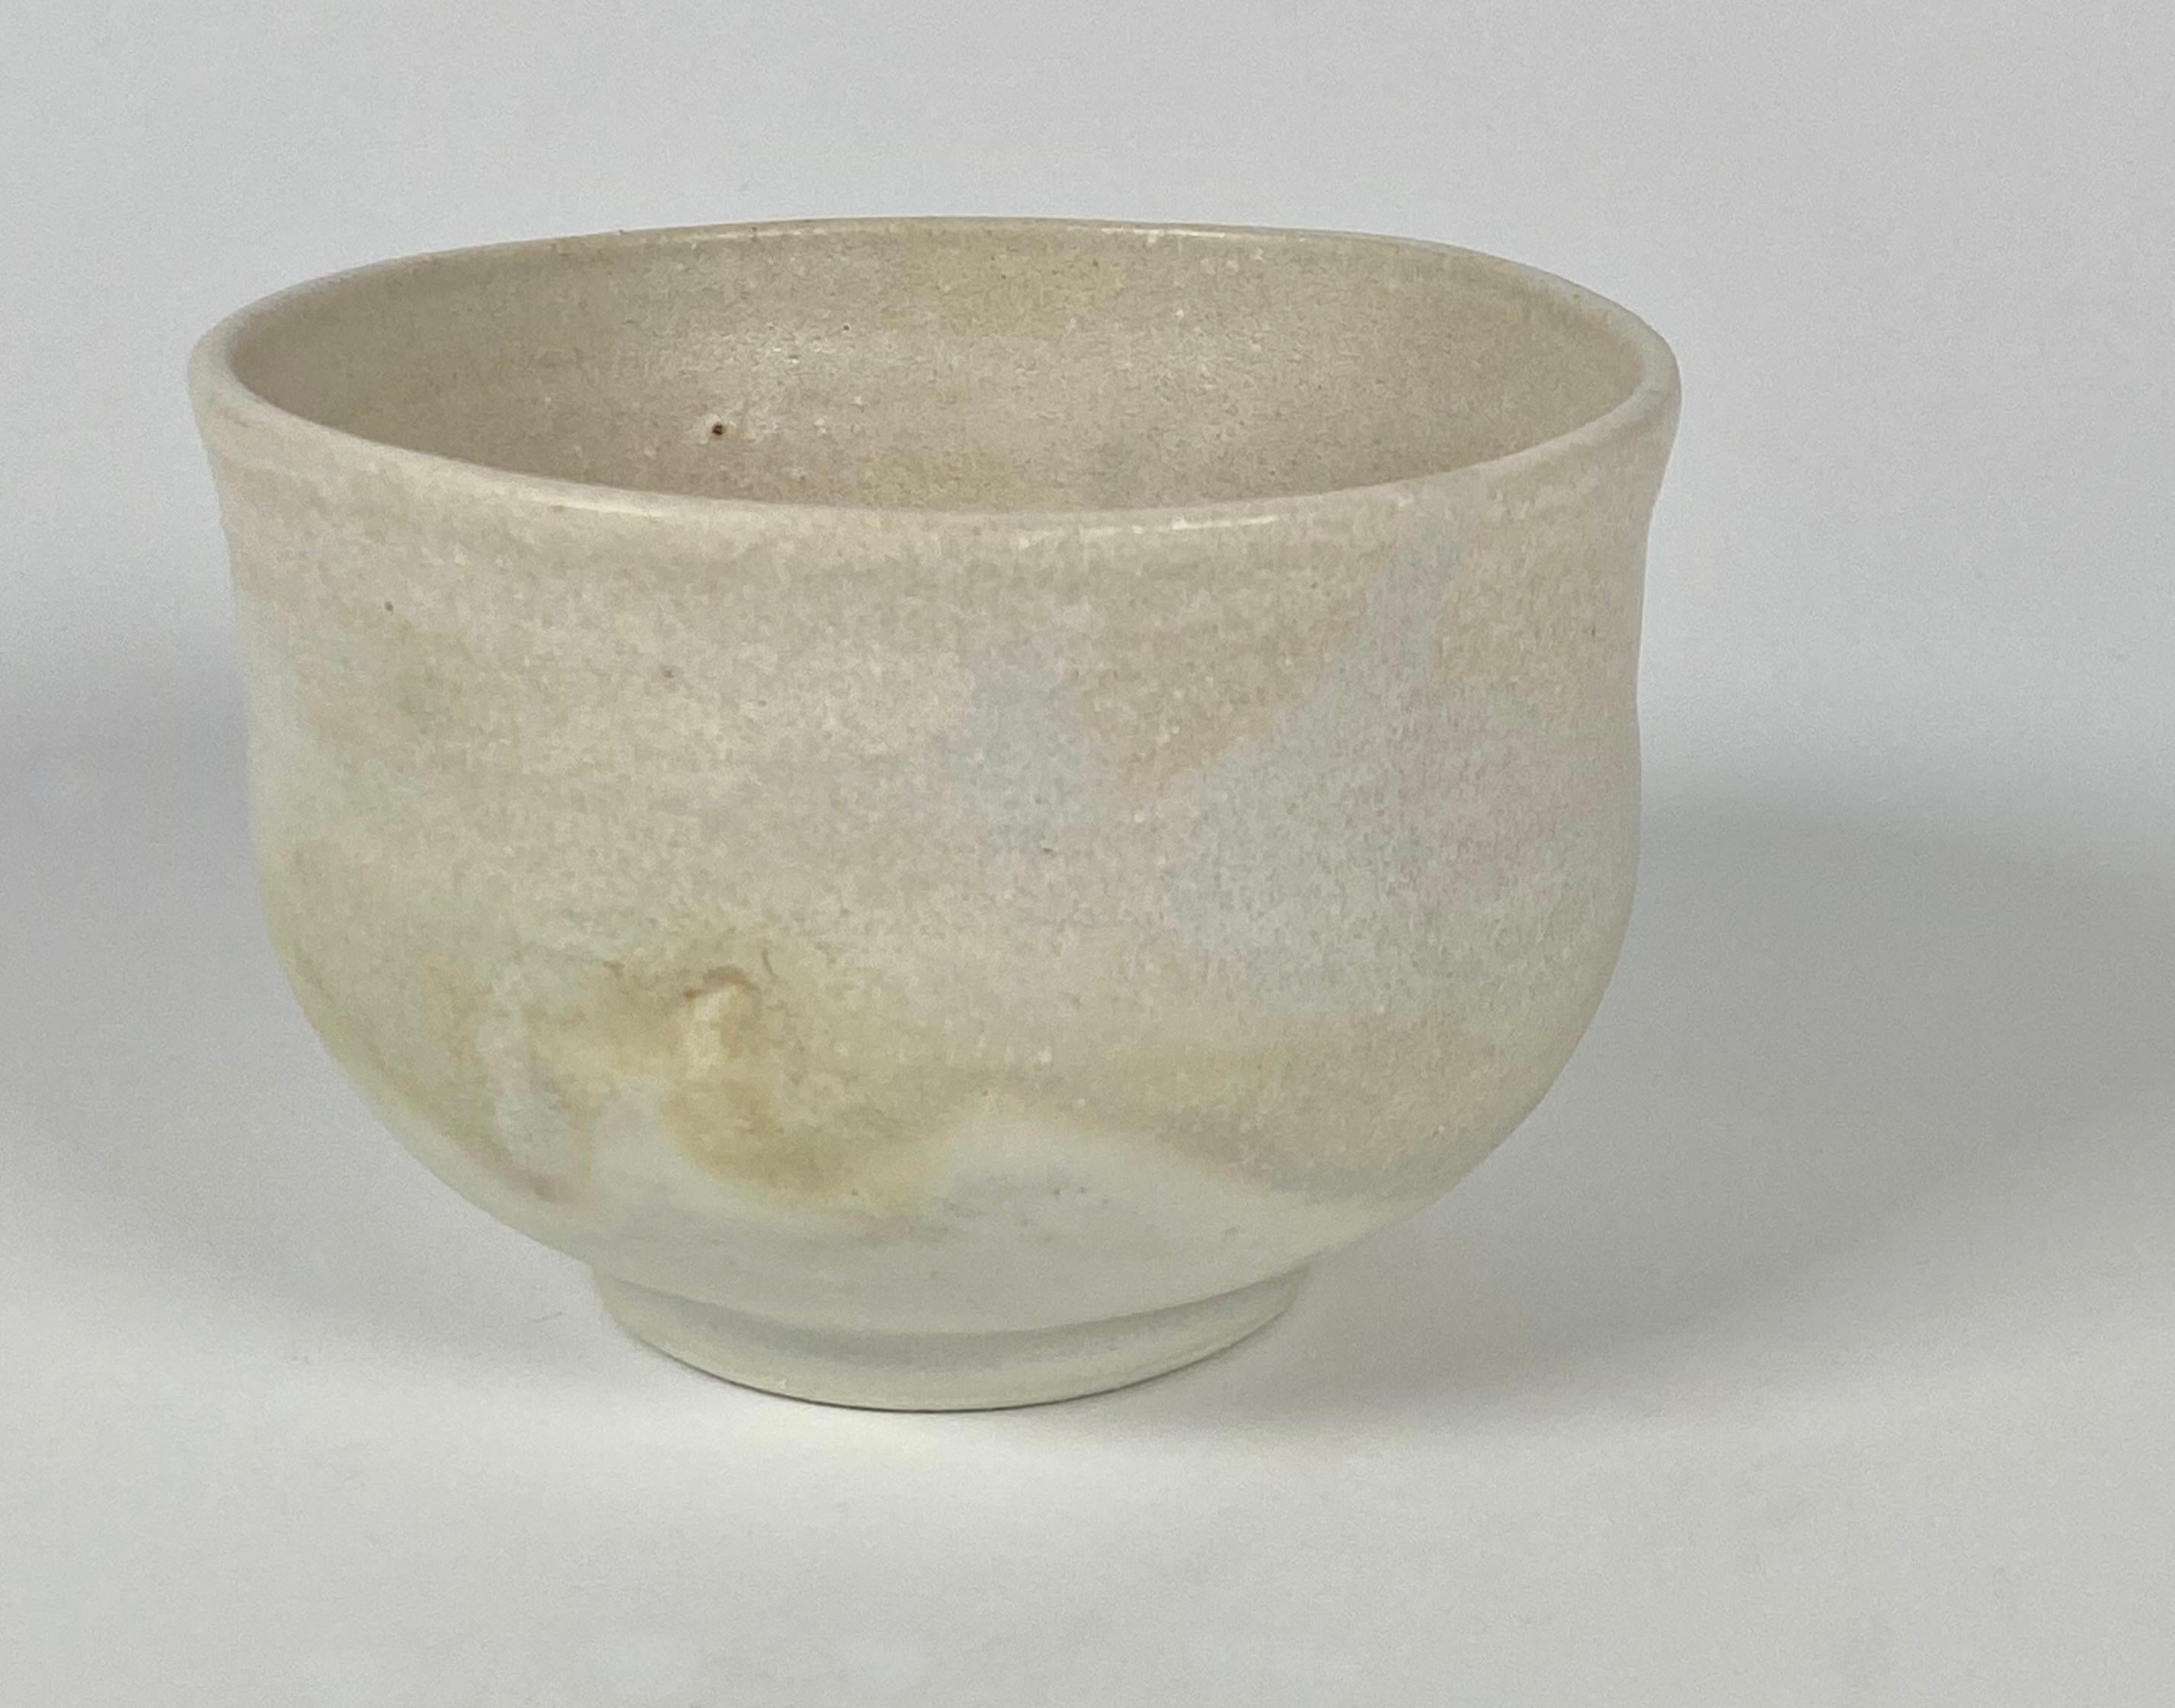 Ceramic tea bowl by artist Yoshiko Takaezu (1922-2011) layers of soft off white glazes in this subtle form. Takaezu was part of the Modernist ceramic artists who challenged the way ceramics were created. She explored the concept of the closed form